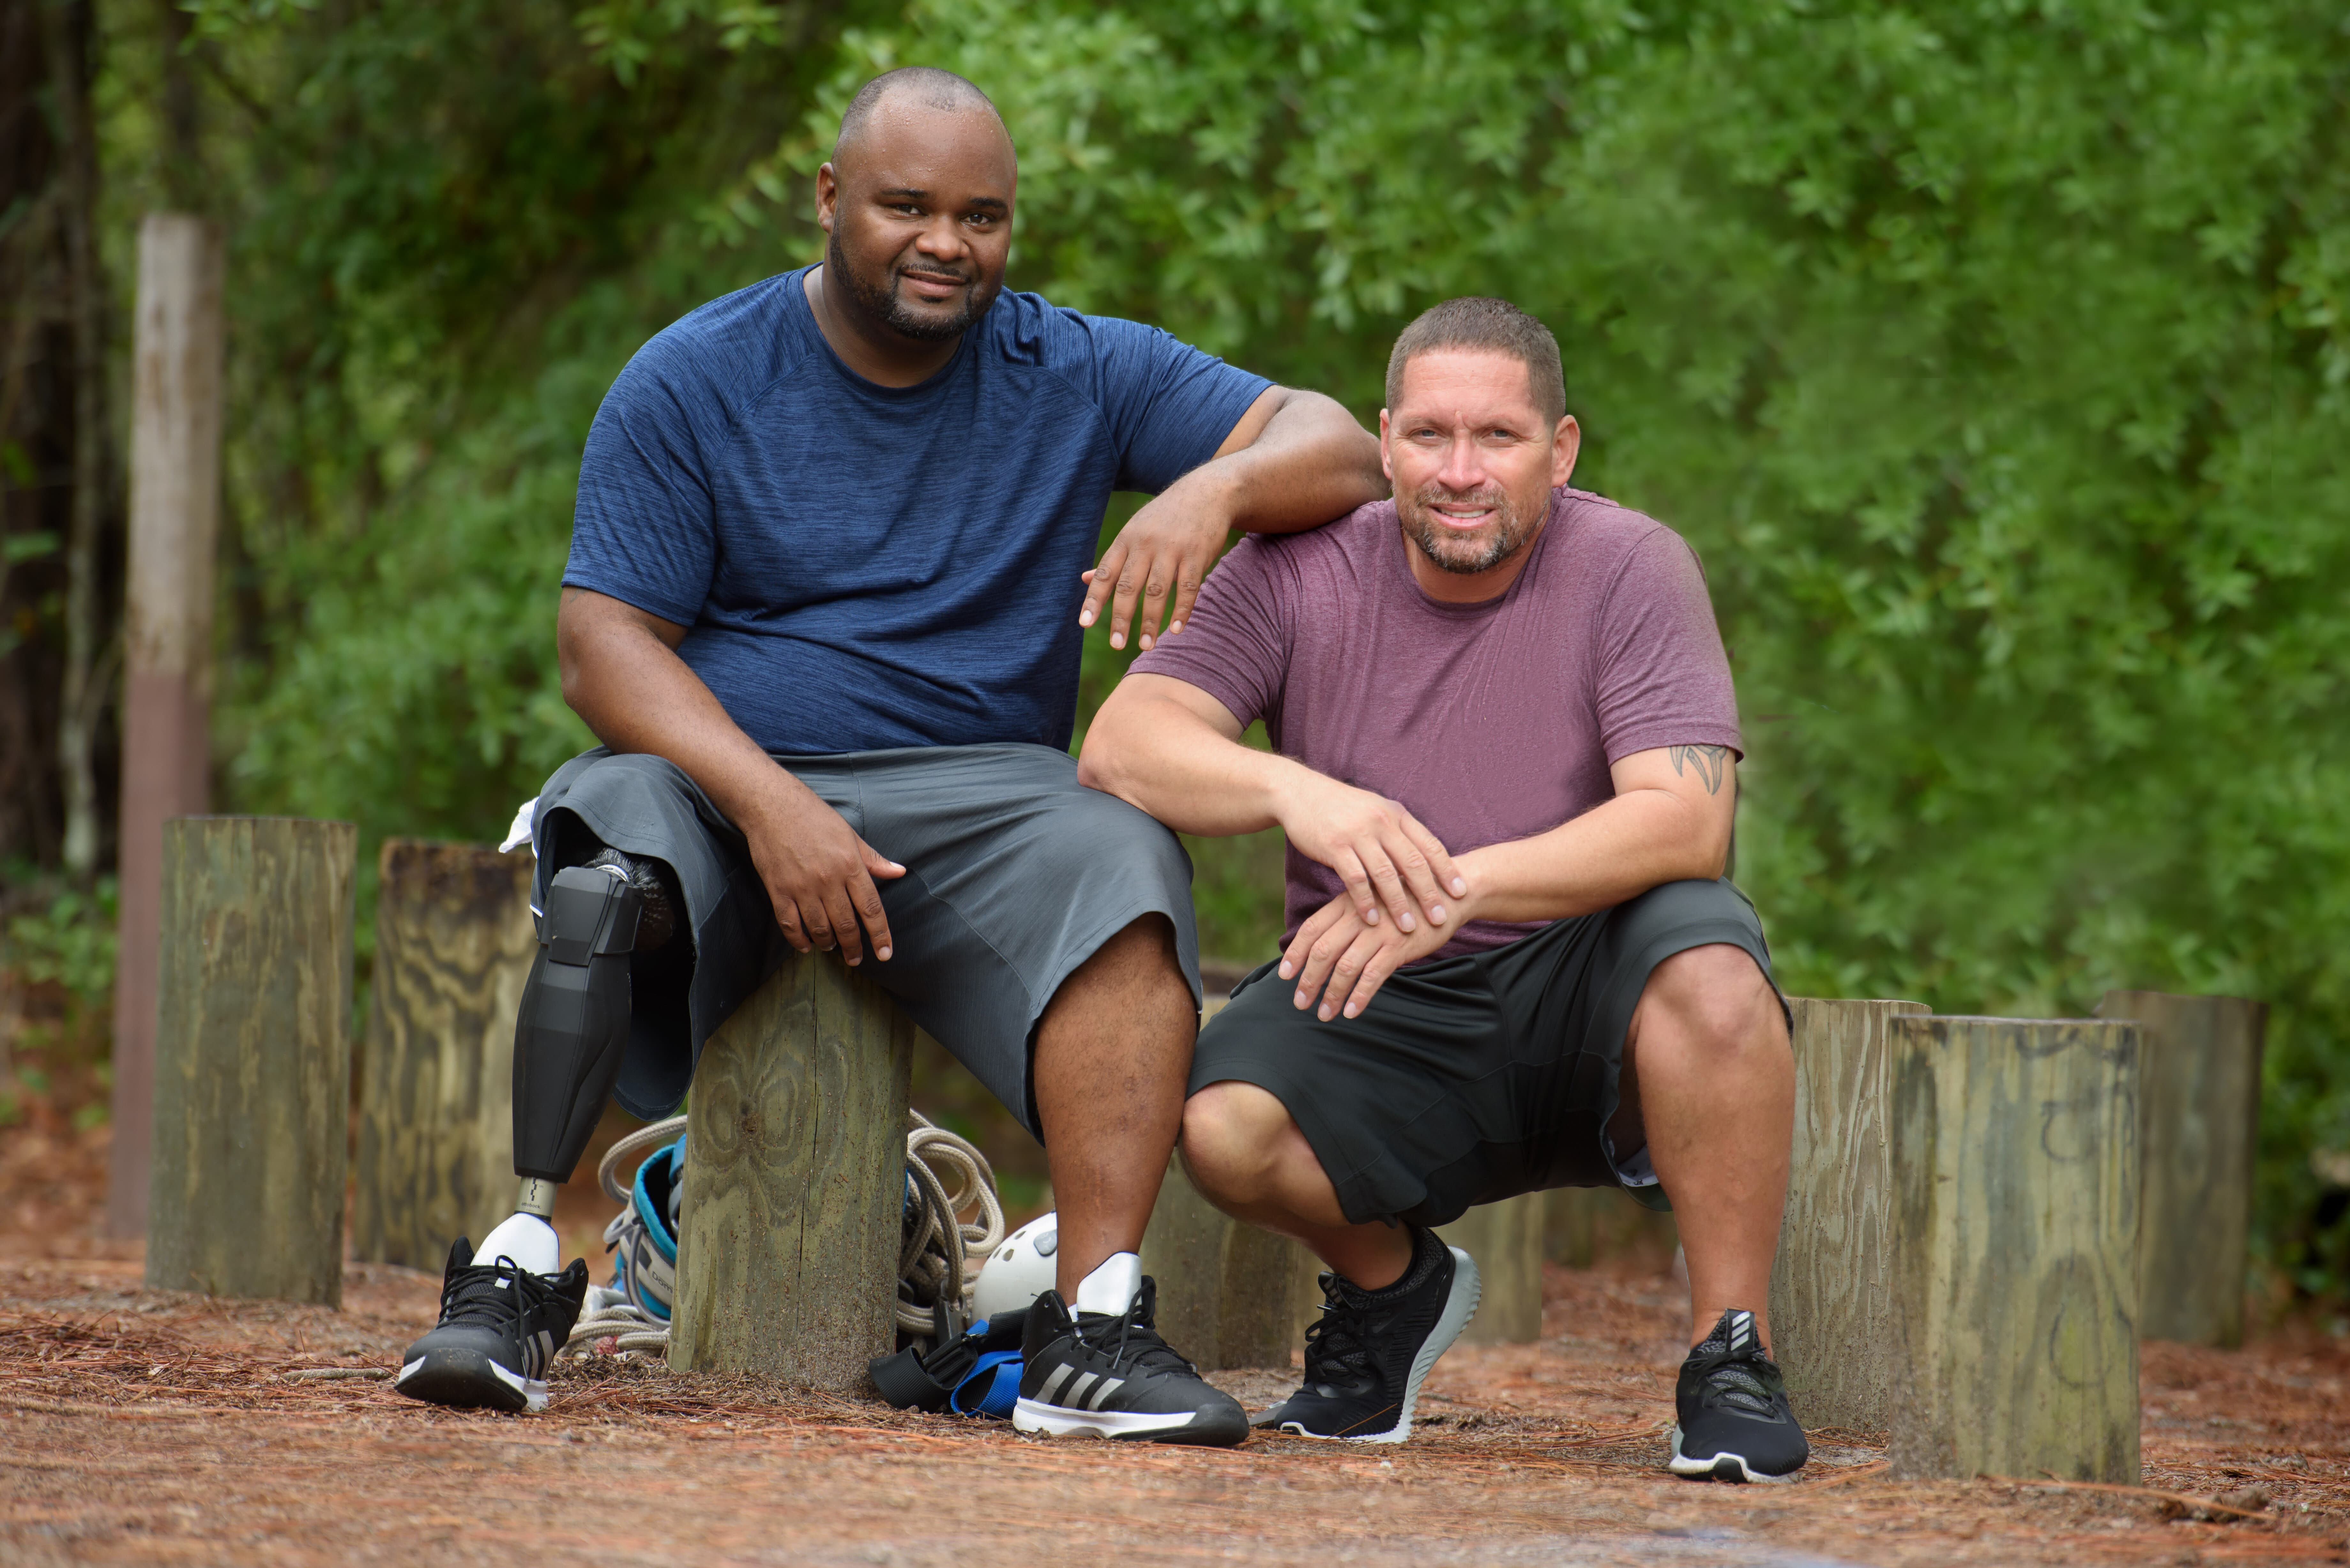 Wounded Warriors Chris Gordon, left, and Manny Colon, right (Photo courtesy of Wounded Warrior Project®)